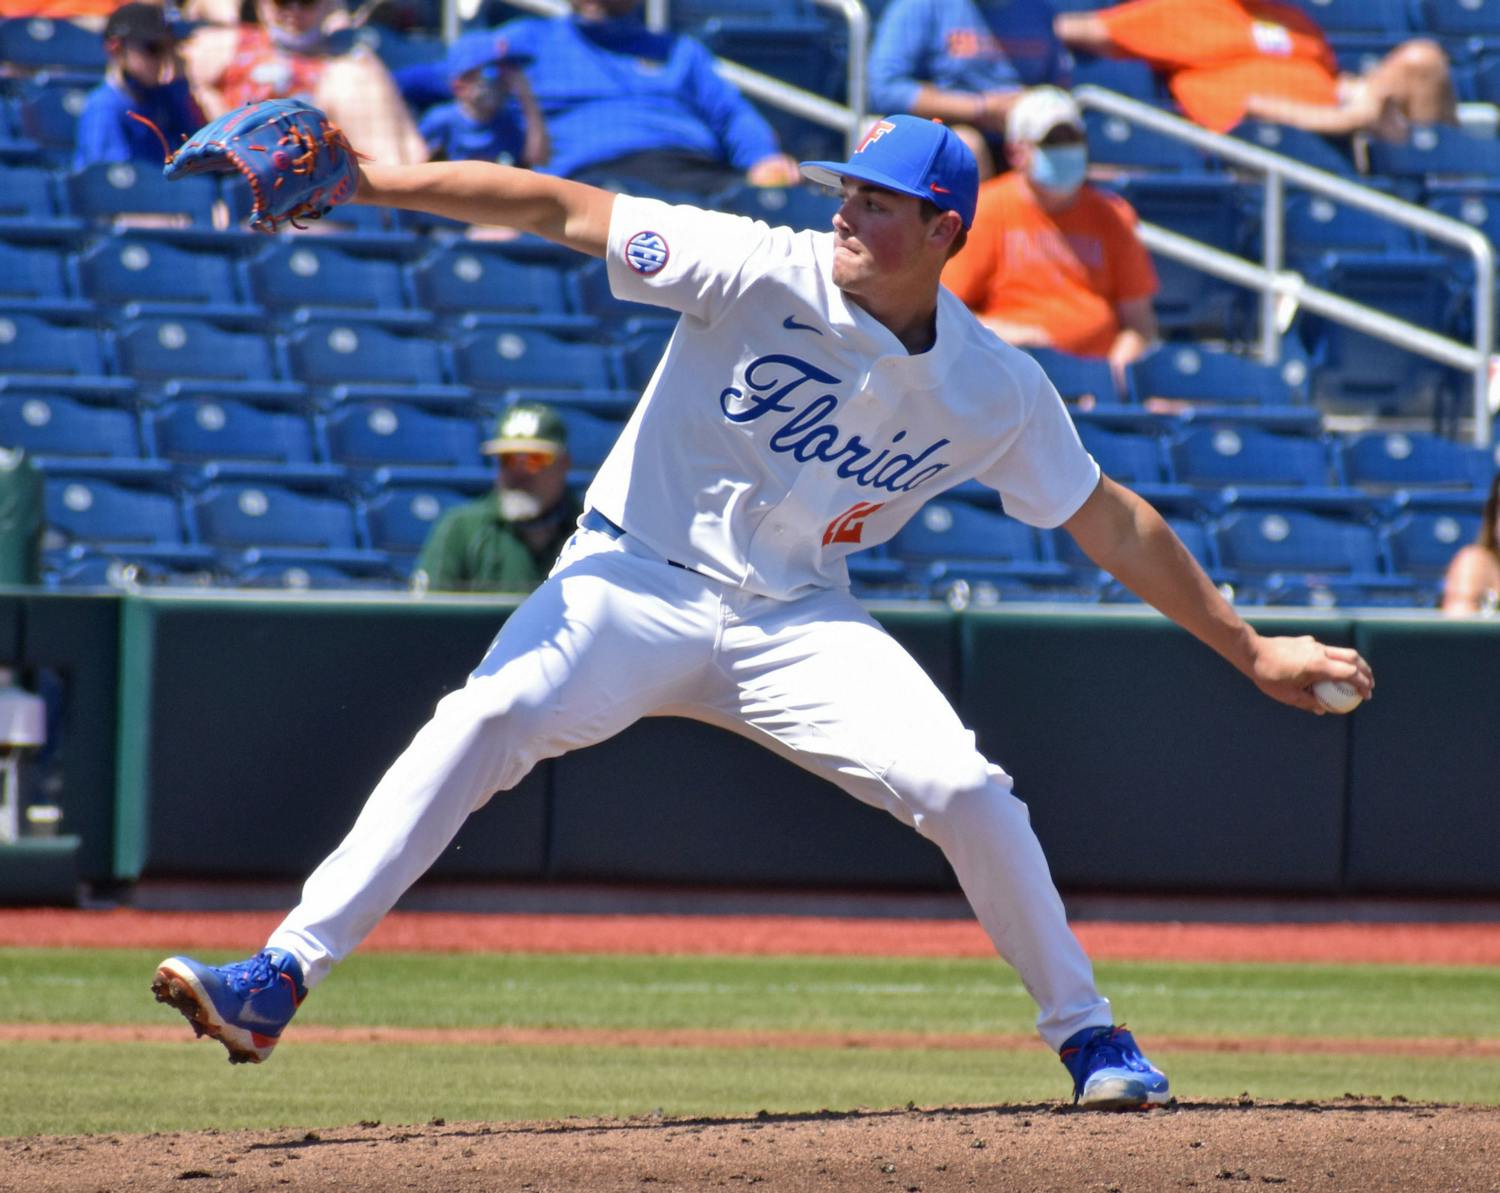 The Gators look to continue a run as they head on the road to a conference weekend series against Auburn. Photo from UF-Jacksonville game March 14.